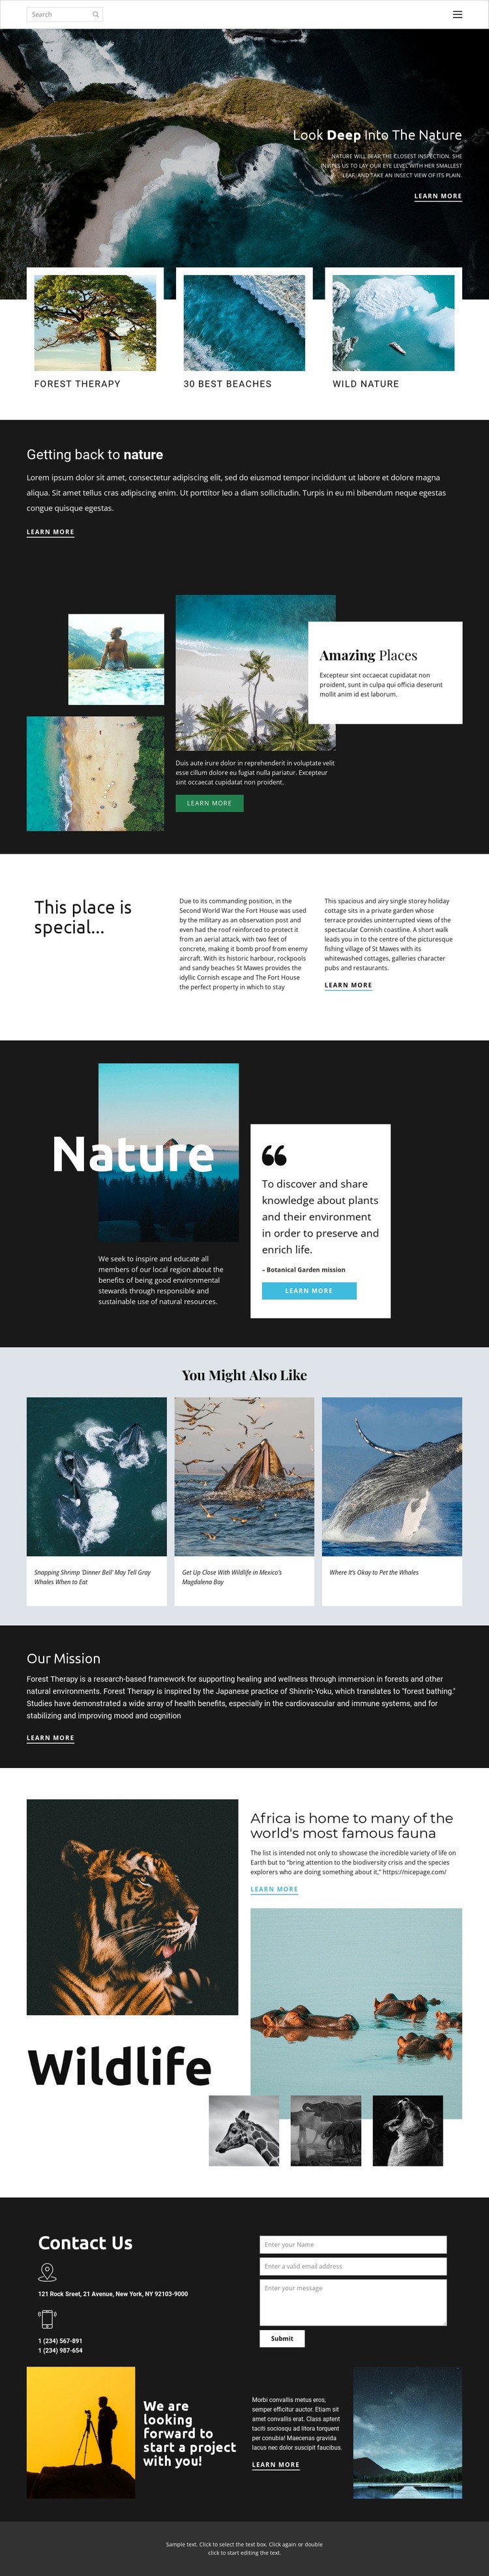 Exploring wildlife and nature Html Code Example